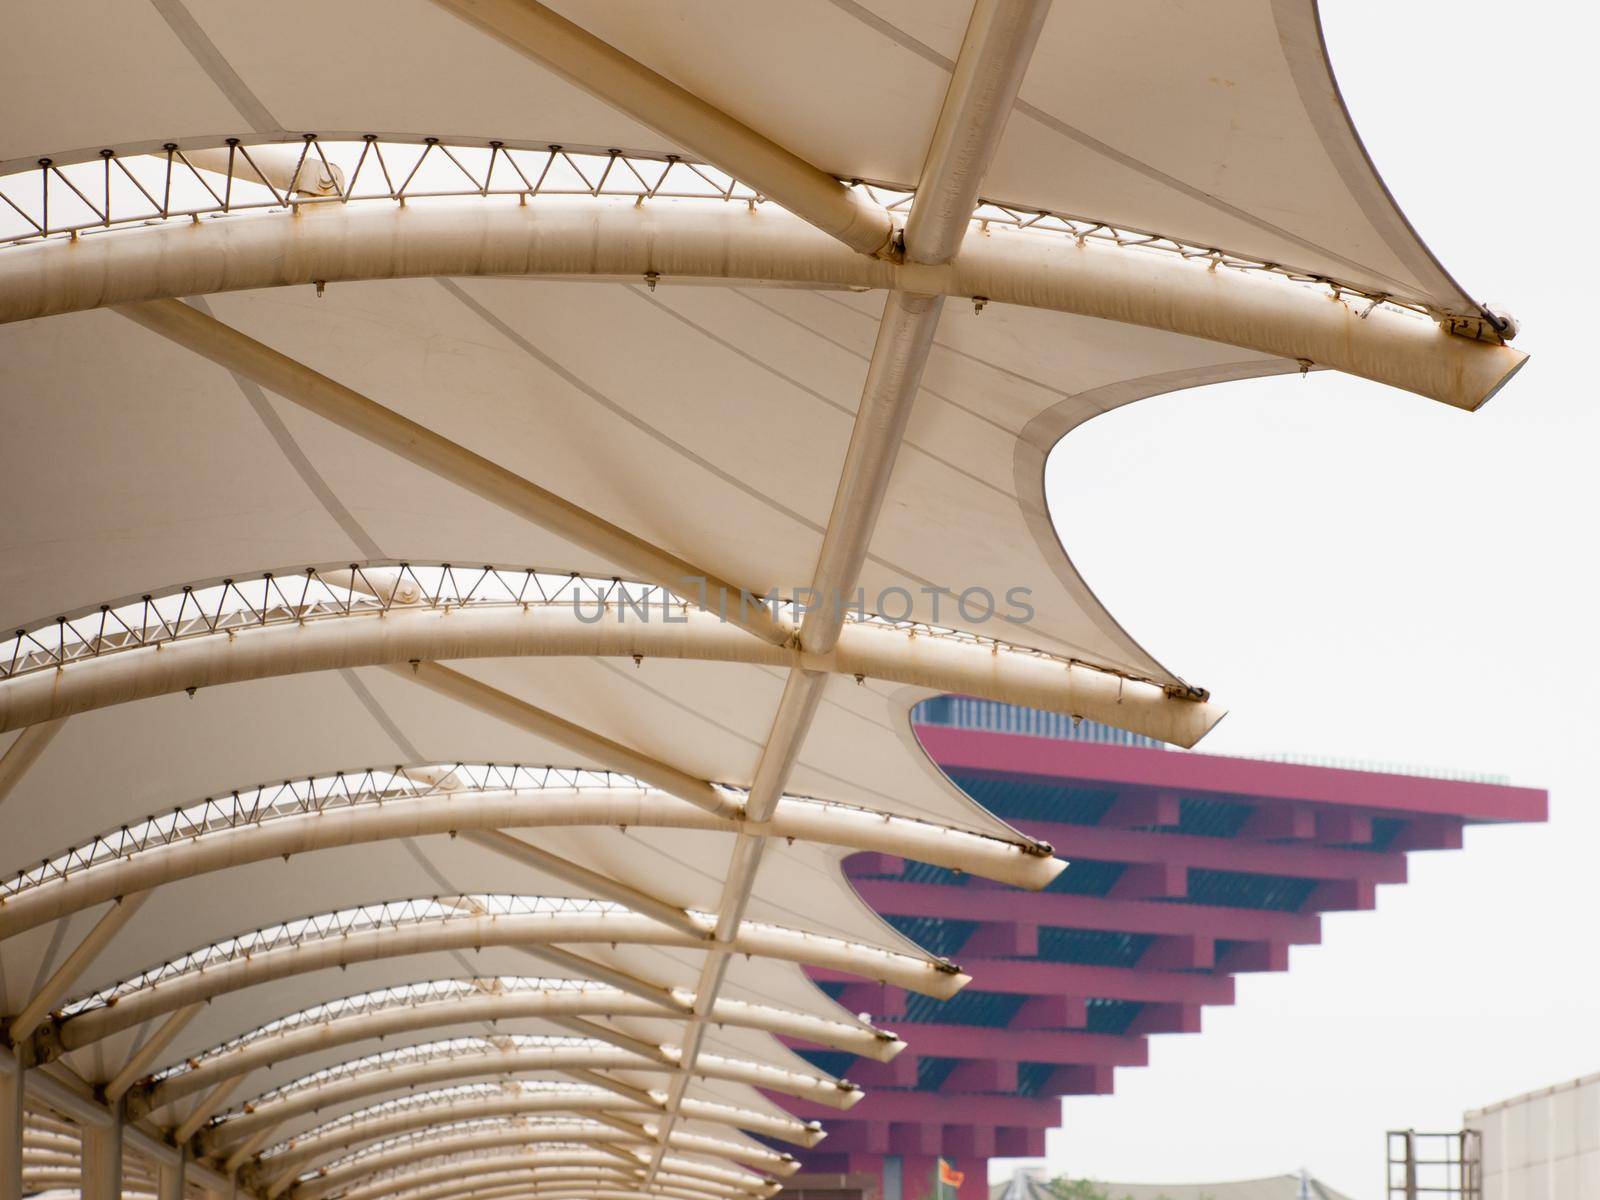 Elevated pedestrian walkway at the EXPO 2010 Shanghai, China.